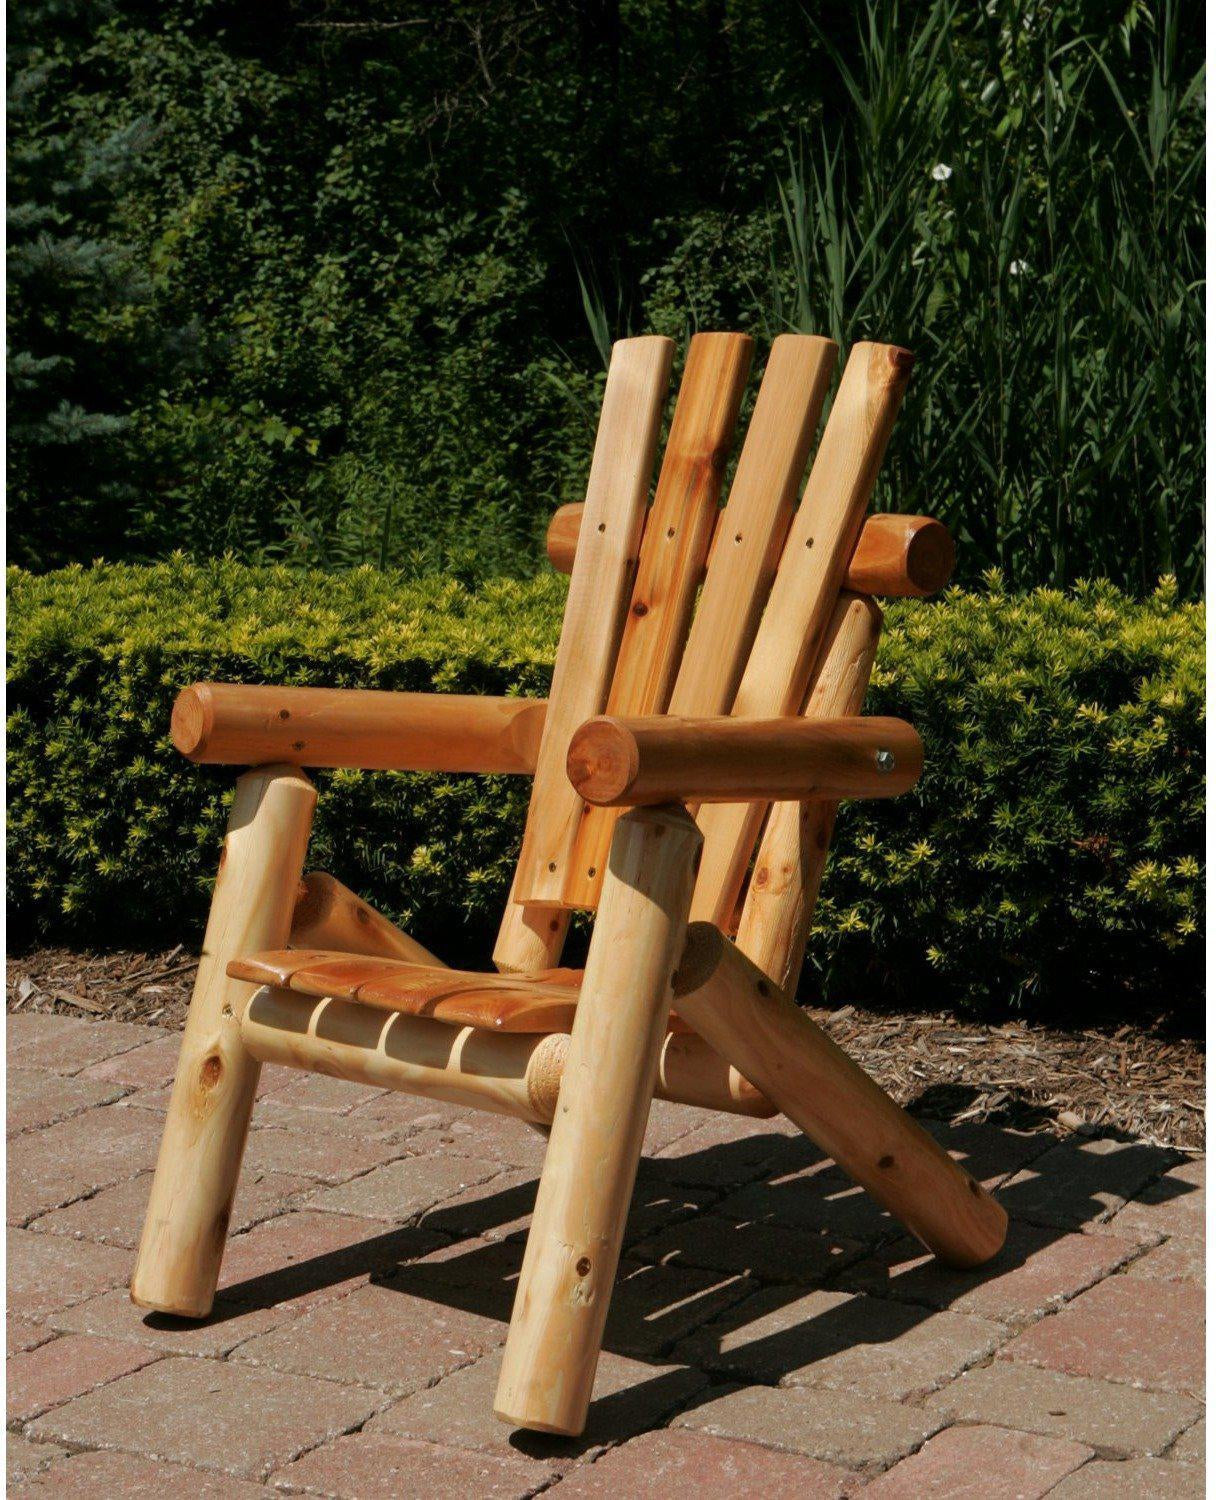 MOON VALLEY RUSTIC Bench and Chairs